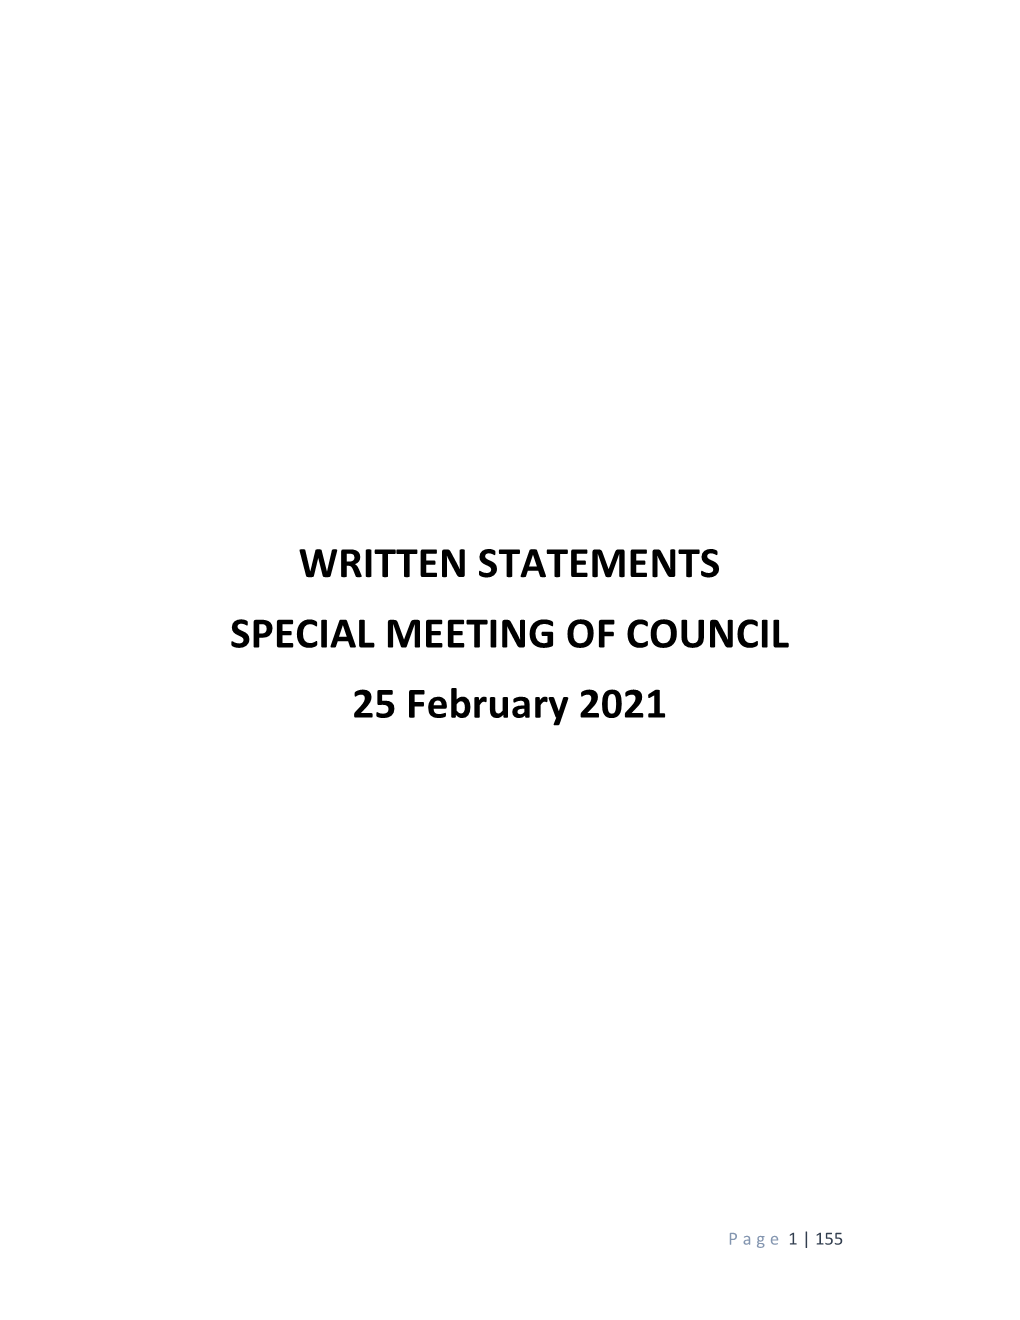 WRITTEN STATEMENTS SPECIAL MEETING of COUNCIL 25 February 2021